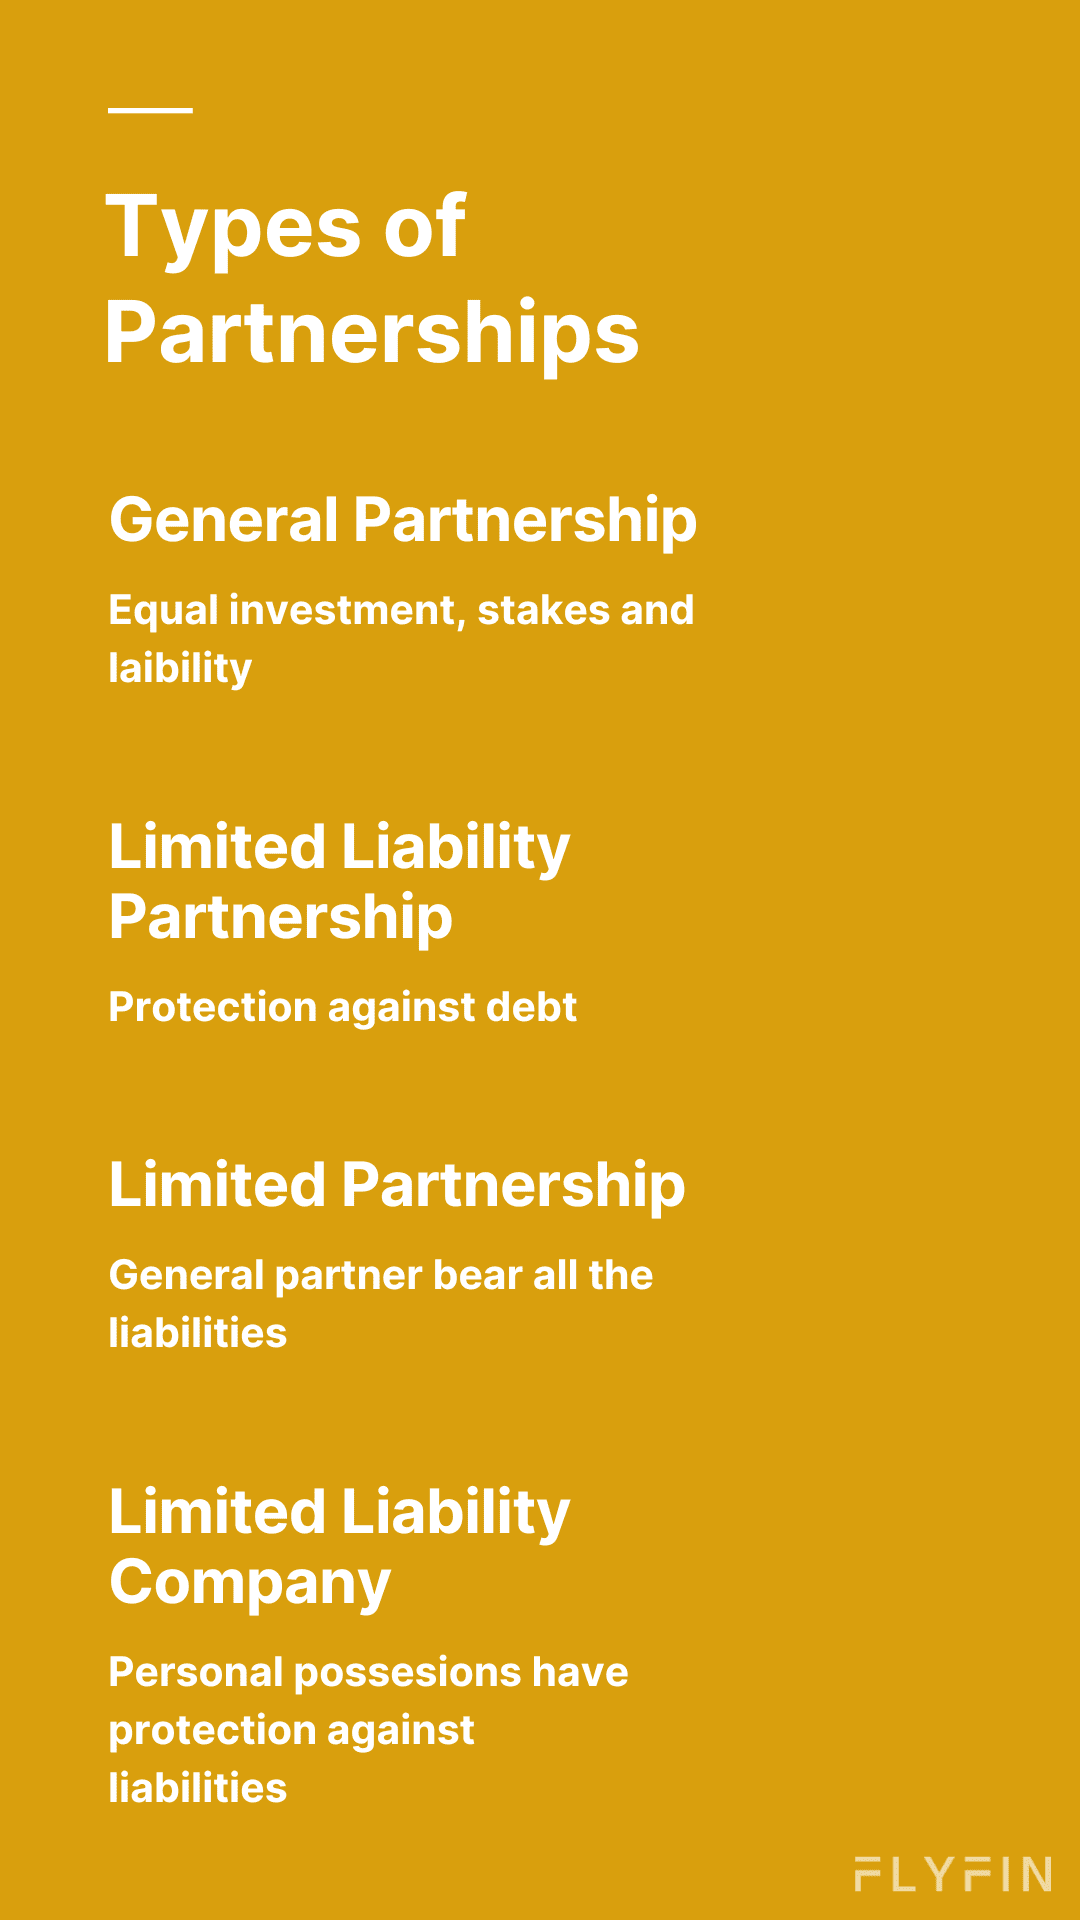 What are the different kinds of partnerships?